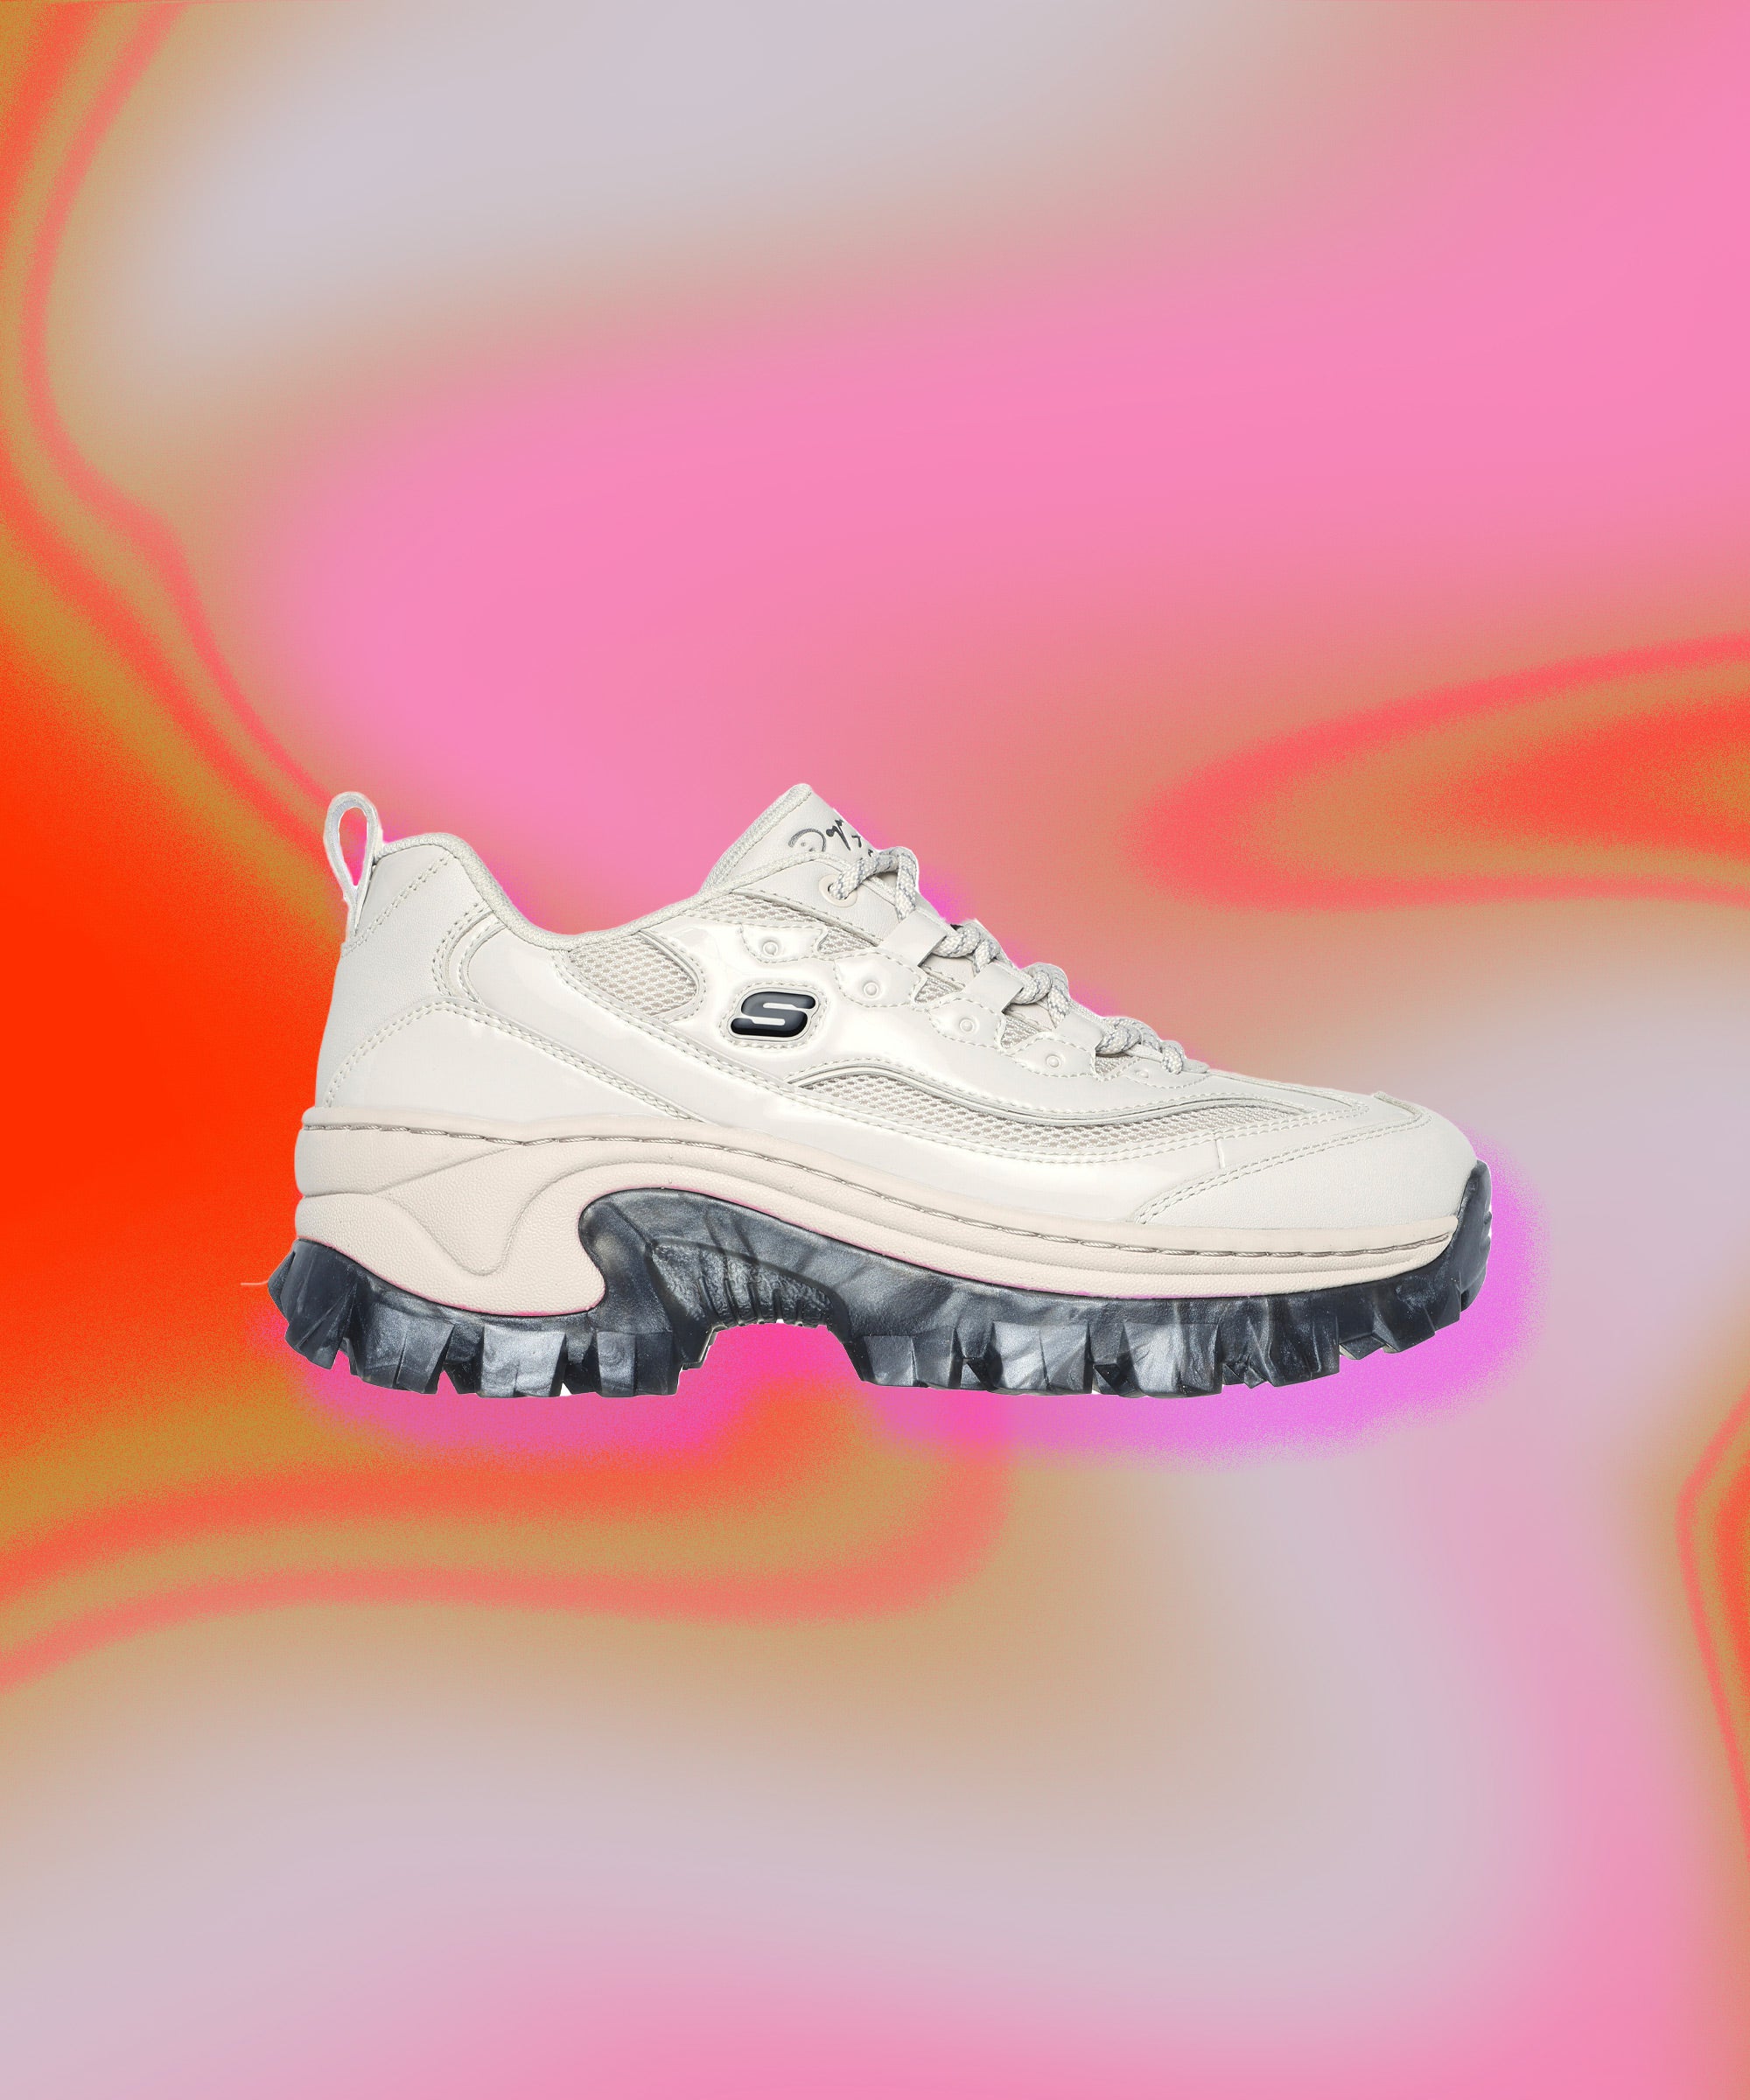 The 18 Best Walking Shoes for High Arches of 2023